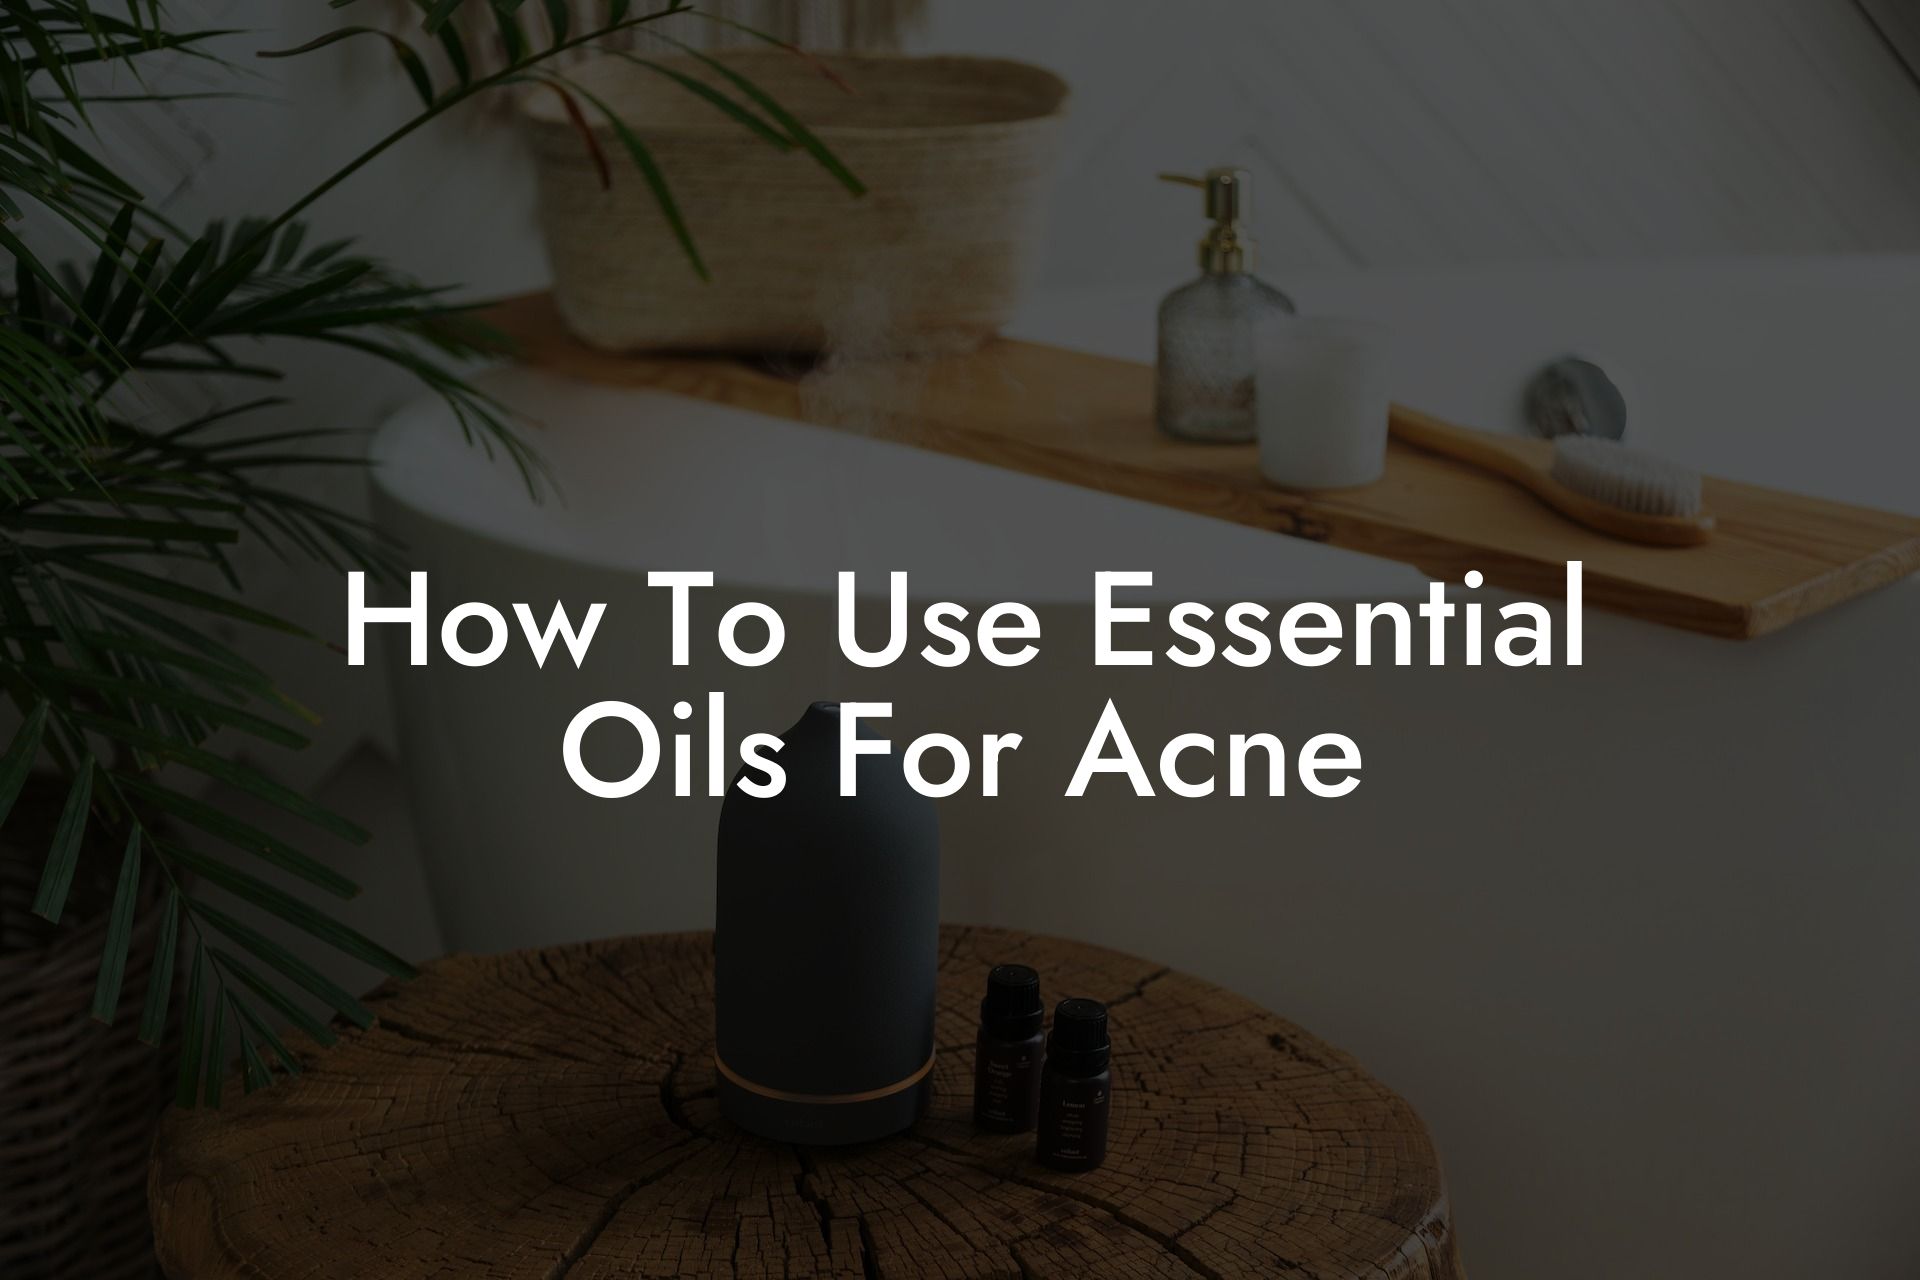 How To Use Essential Oils For Acne